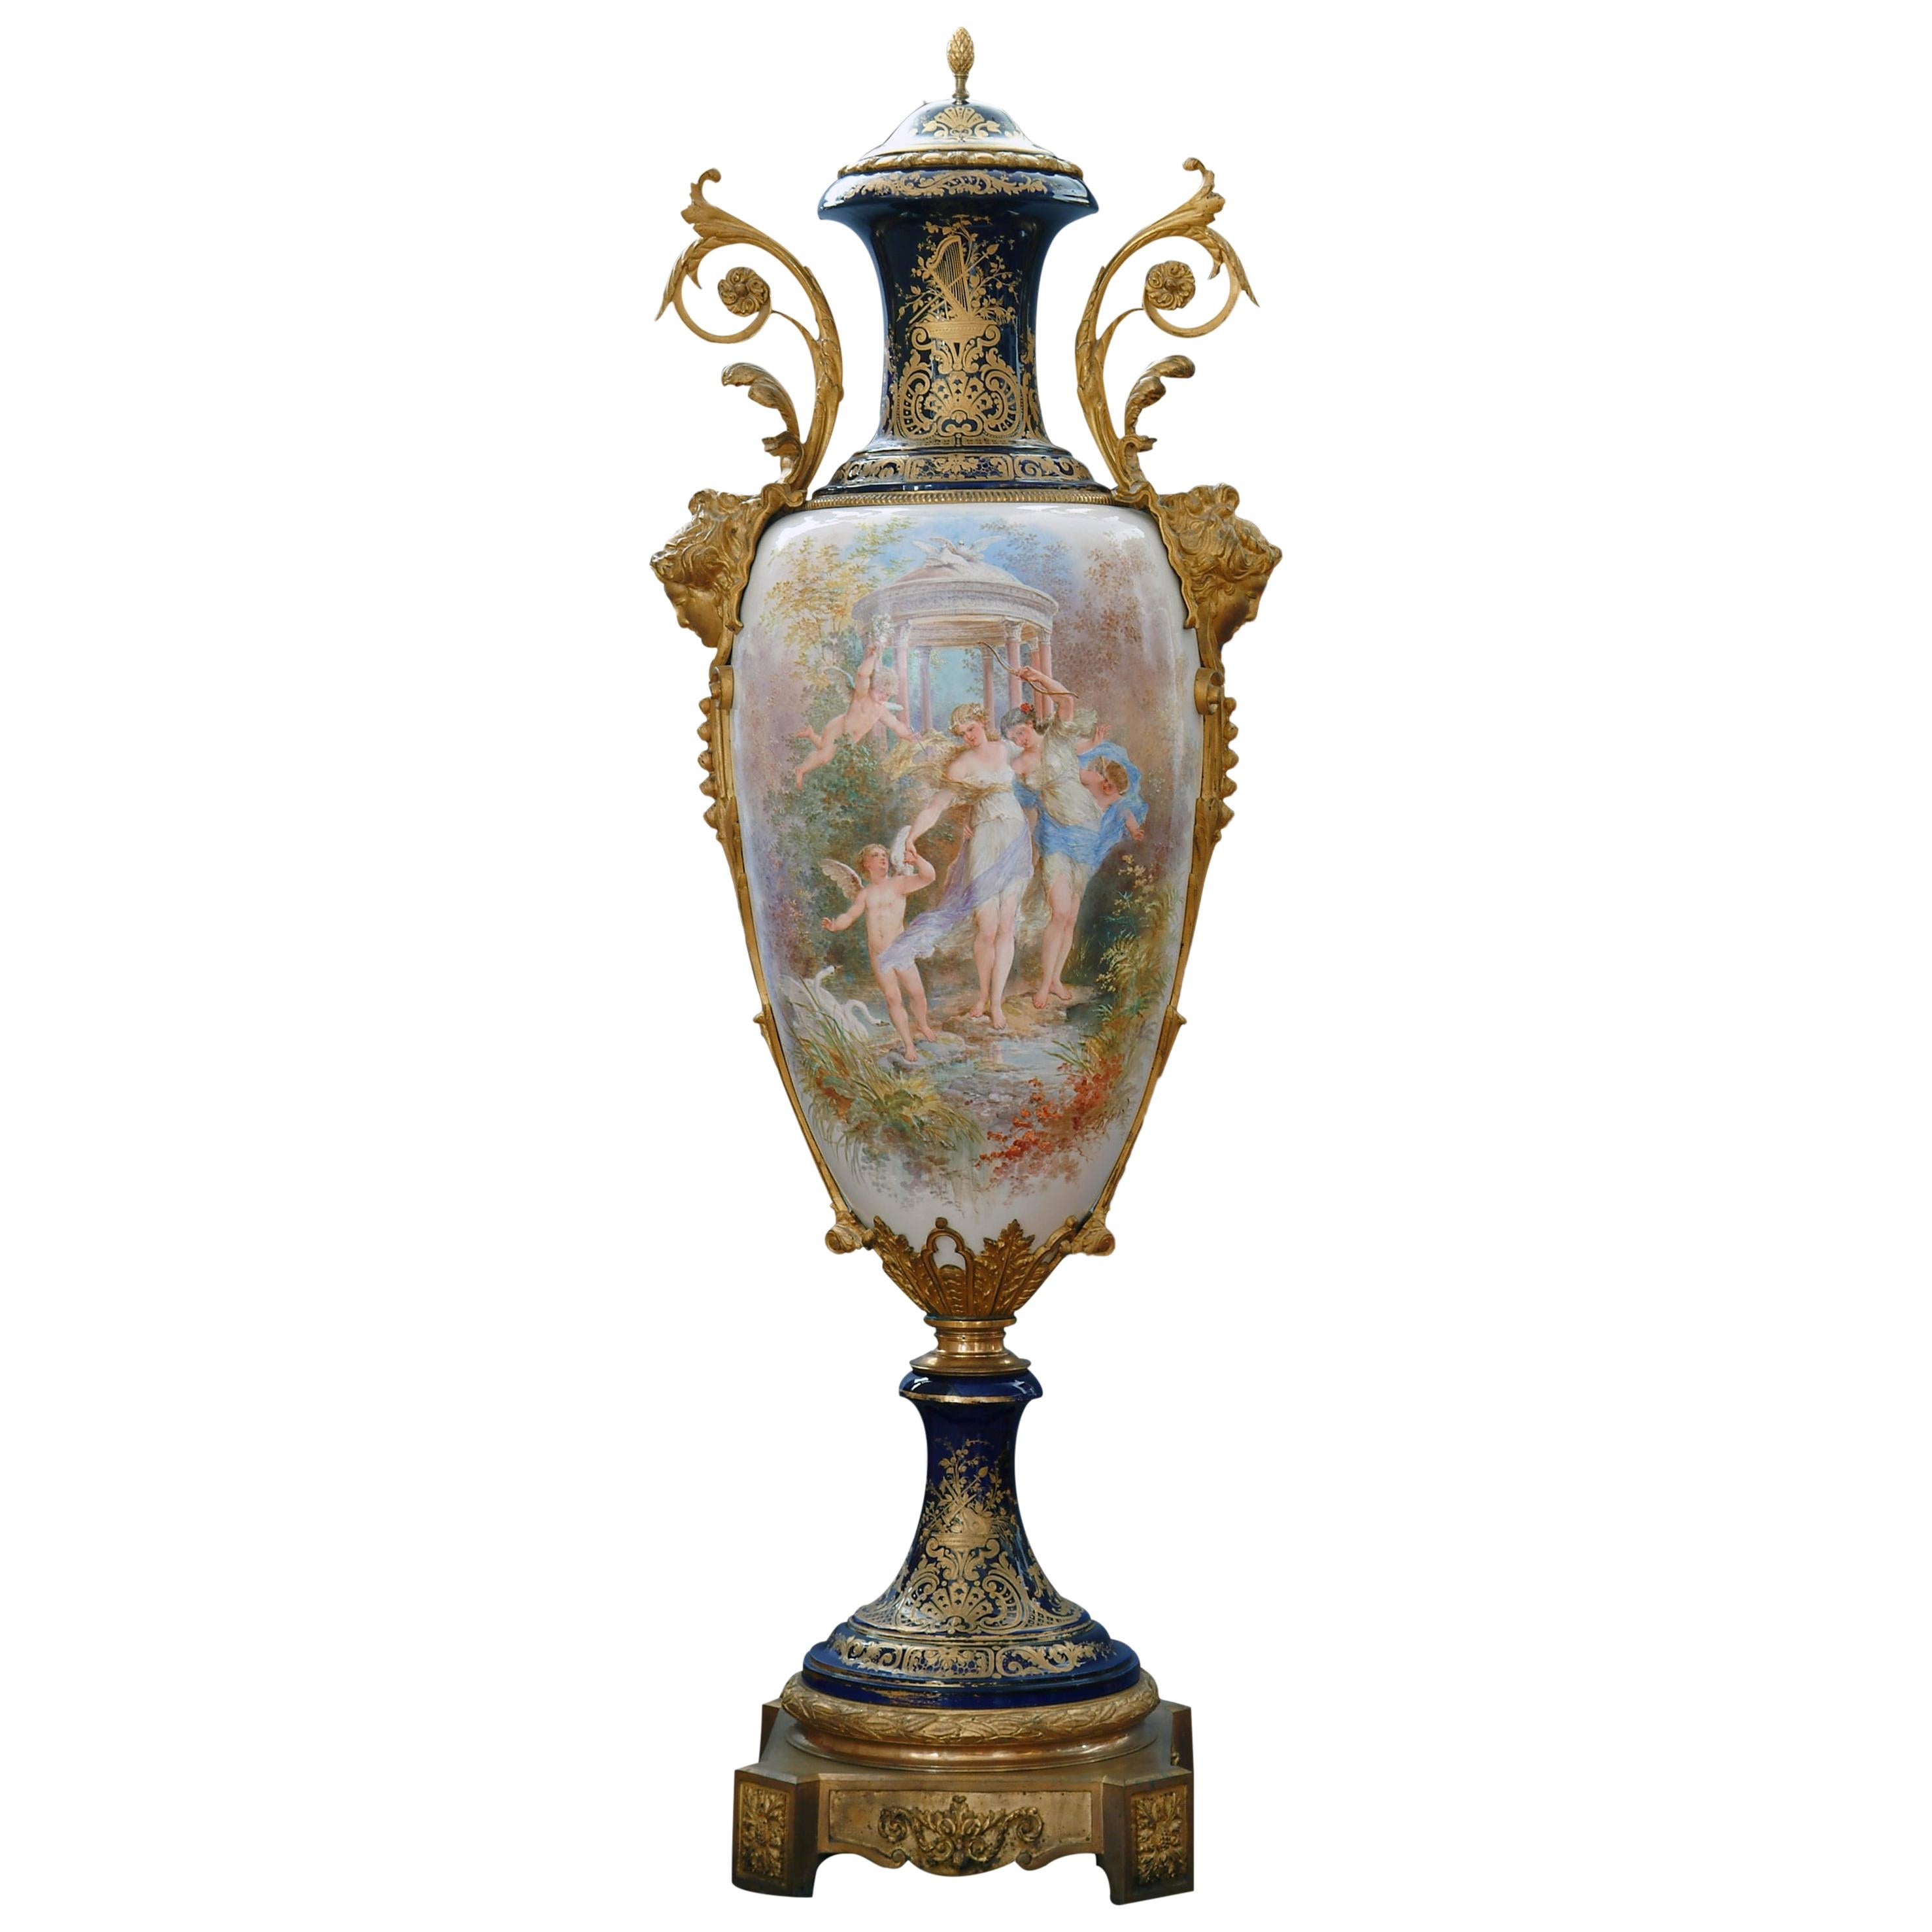 Monumental Antique French Sevres Porcelain Covered Urn - 66" tall